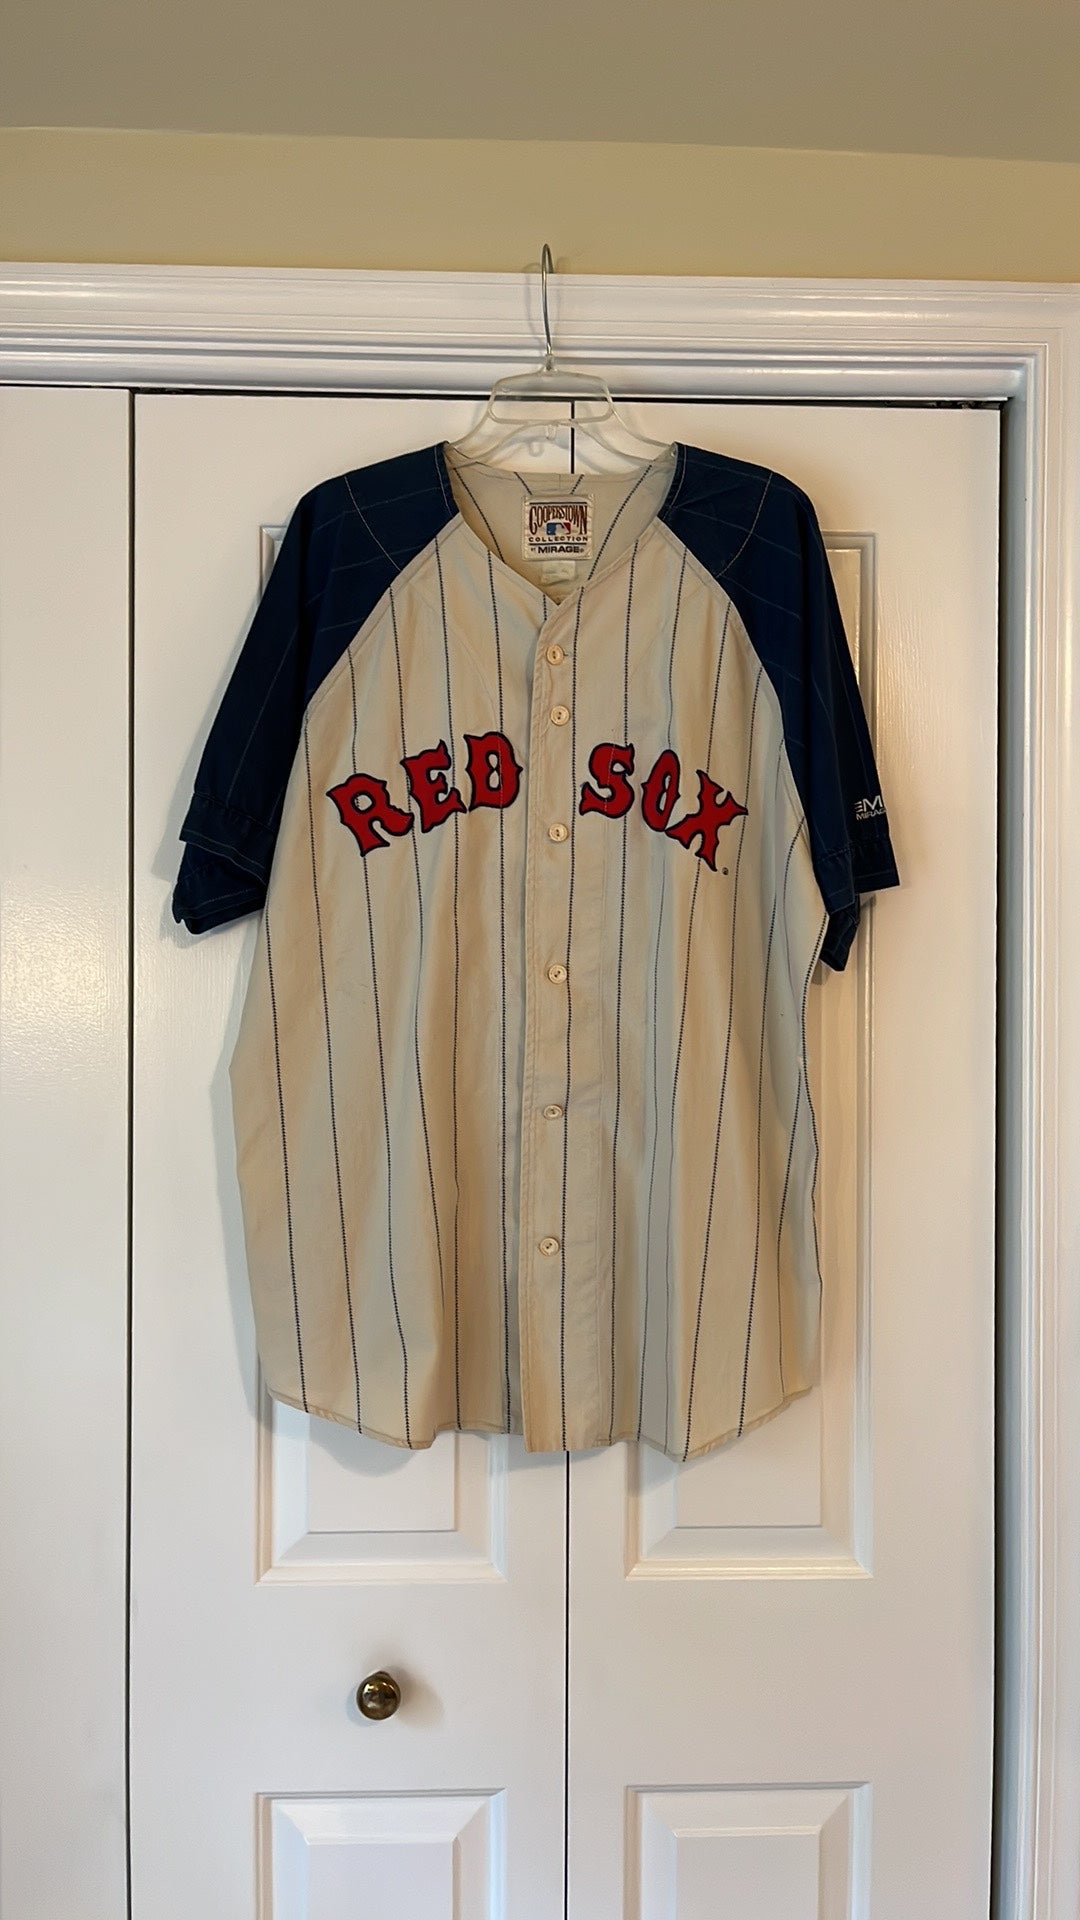 Men's Stitches Navy/Red Boston Red Sox Cooperstown Collection V-Neck Team Color Jersey